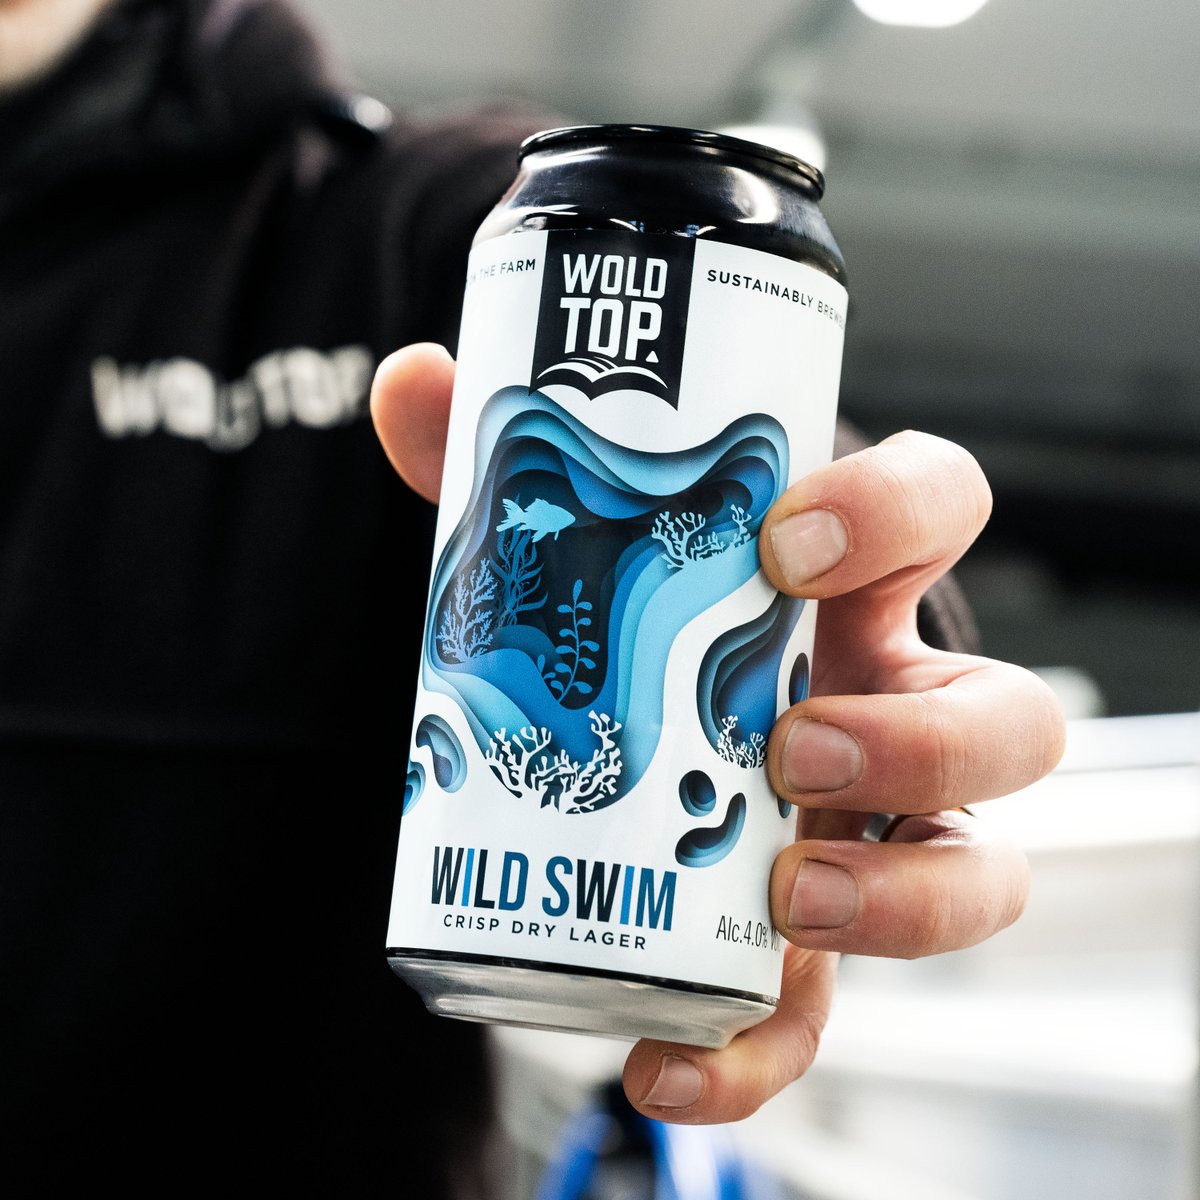 Introducing our first ever canned beer, Wild Swim! Wild Swim is a stripped back, clean and refreshing lager. A crisp, dry taste with notes of soft apricot and sweet melon in the background. Available to buy online tomorrow. Gluten Free & Vegan friendly.